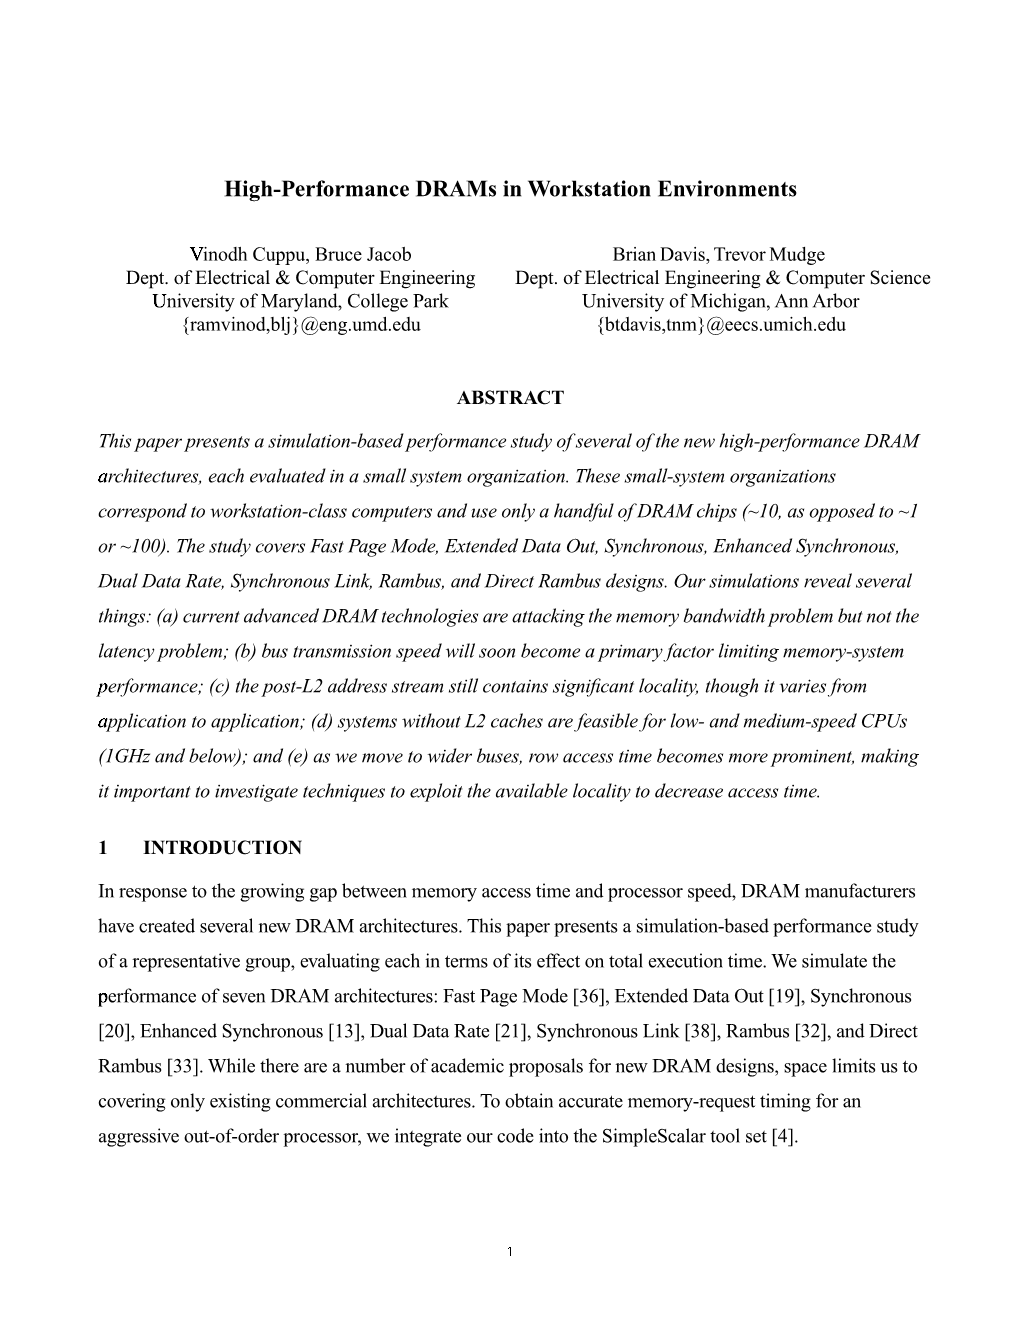 High-Performance Drams in Workstation Environments